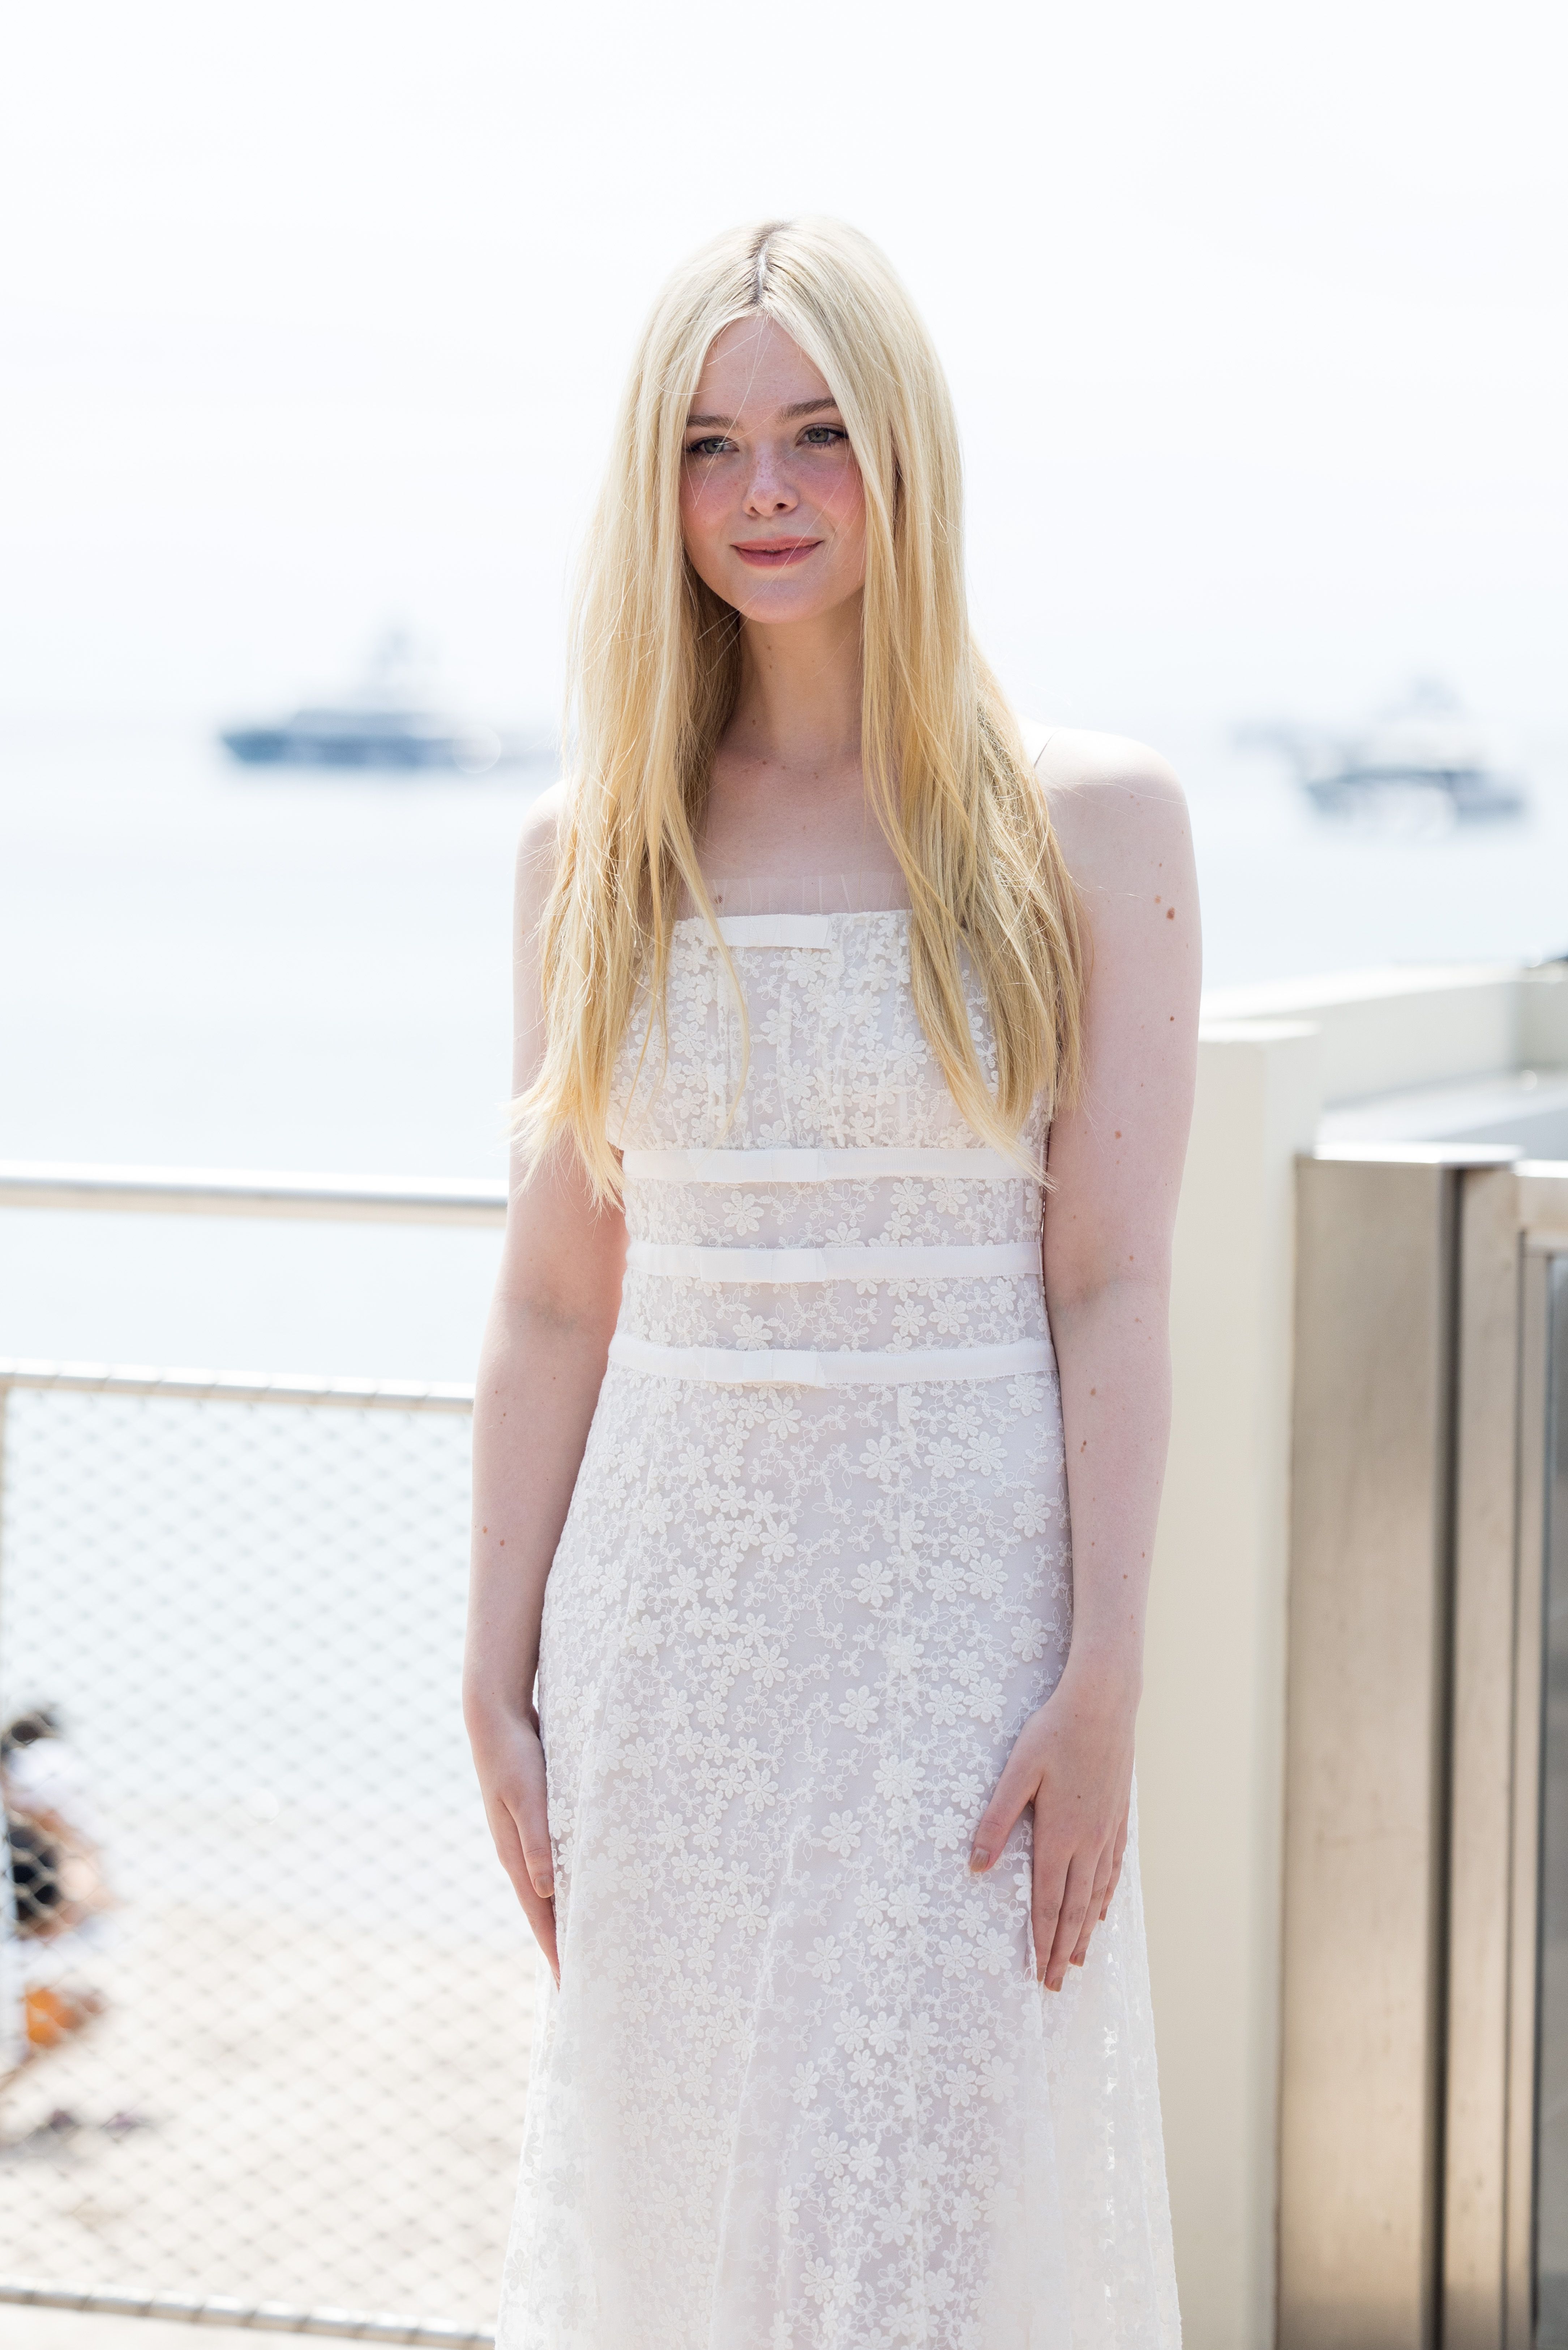 Elle Fanning says she lost an acting job at 16 because she was considered  'unf--kable' - Yahoo Sports